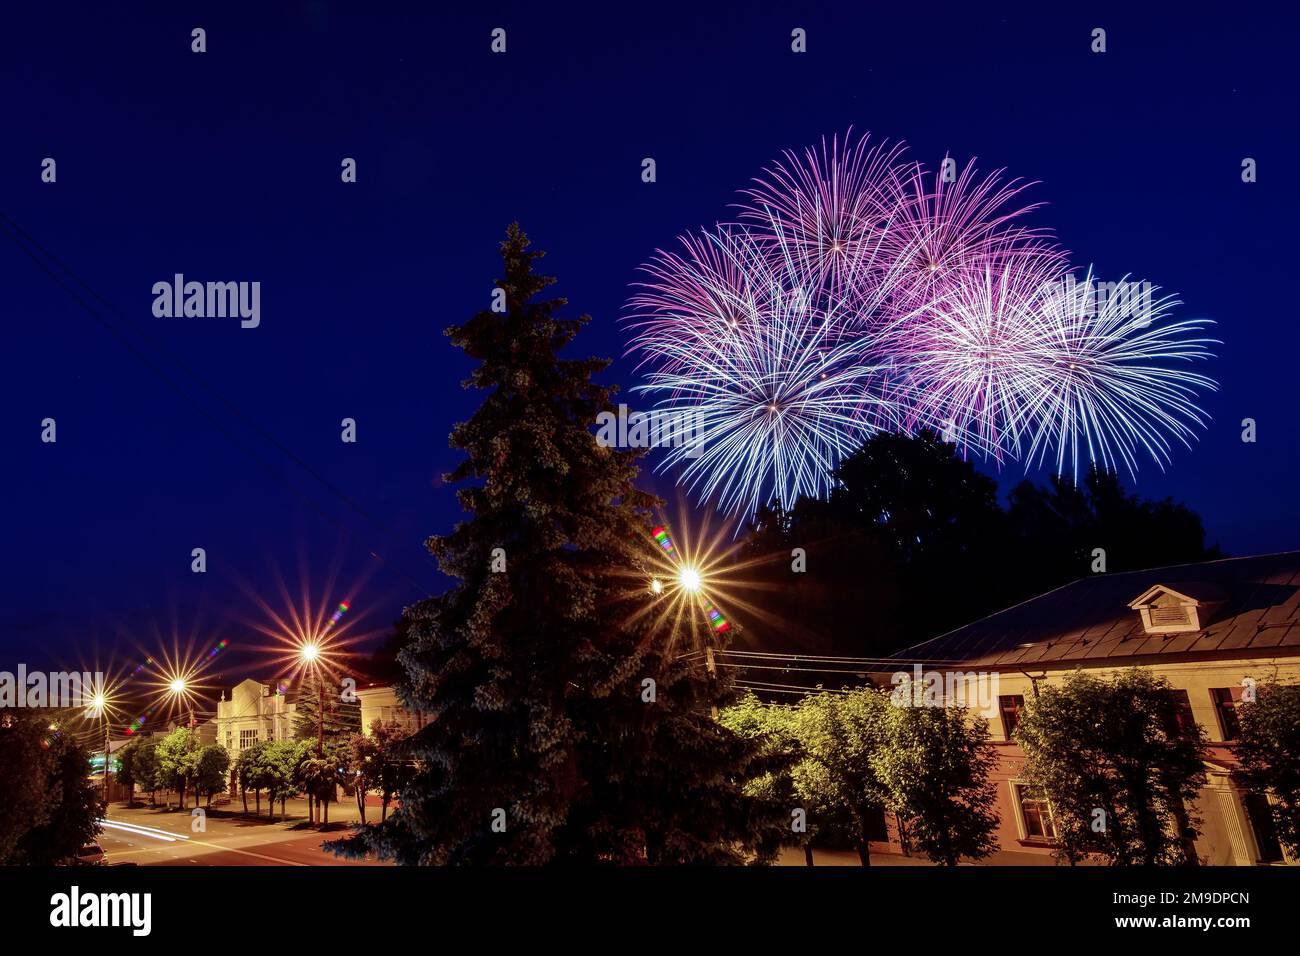 Multicolored fireworks on the holiday over the city against the night blue sky Stock Photo